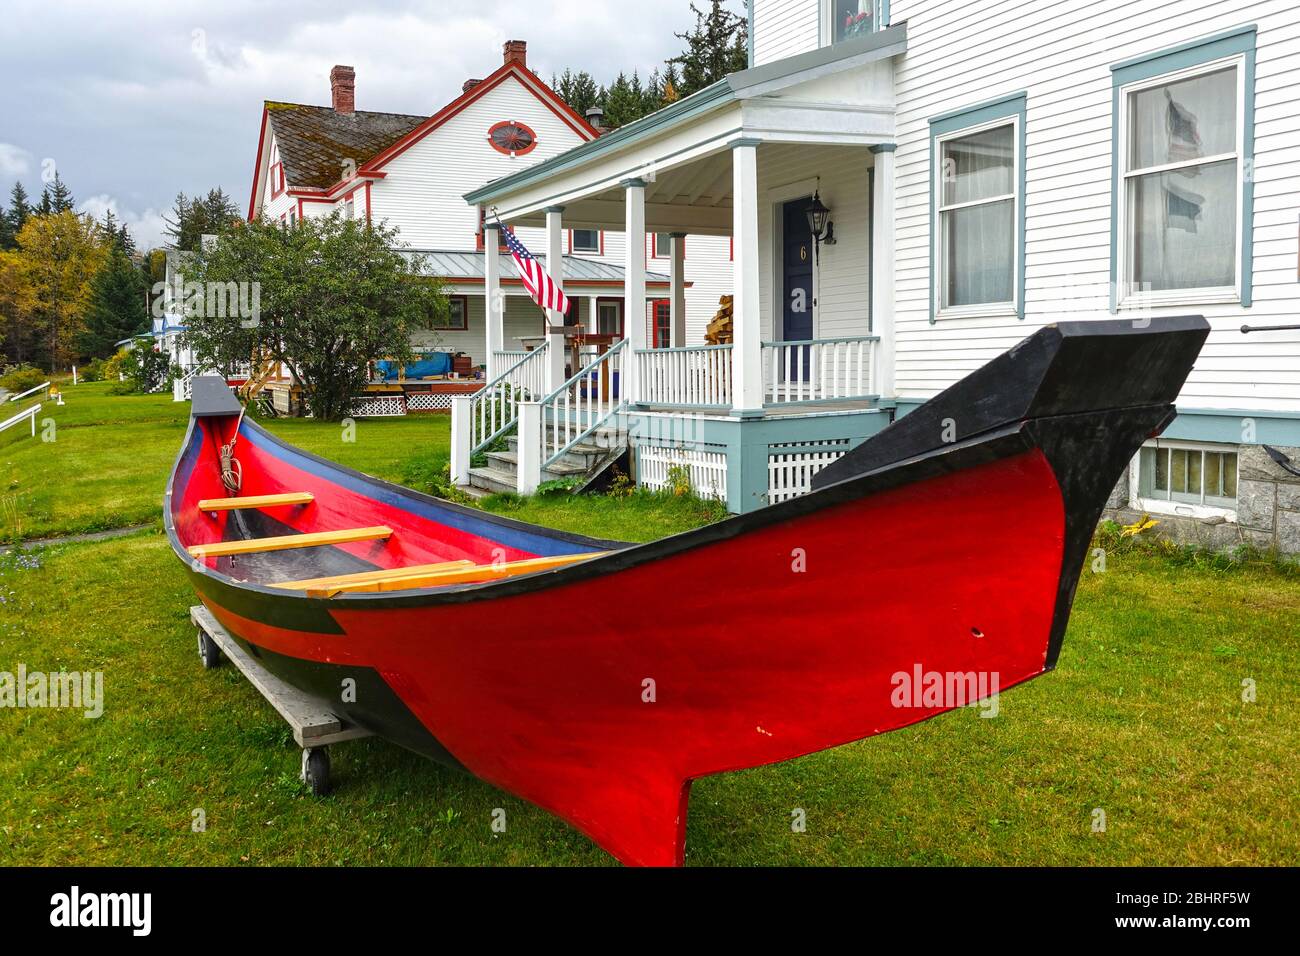 Haines, Alaska, USA - September 24, 2018: Indian canoe in front of restored wooden houses at Fort Seward, a historic landmark in Haines. Stock Photo